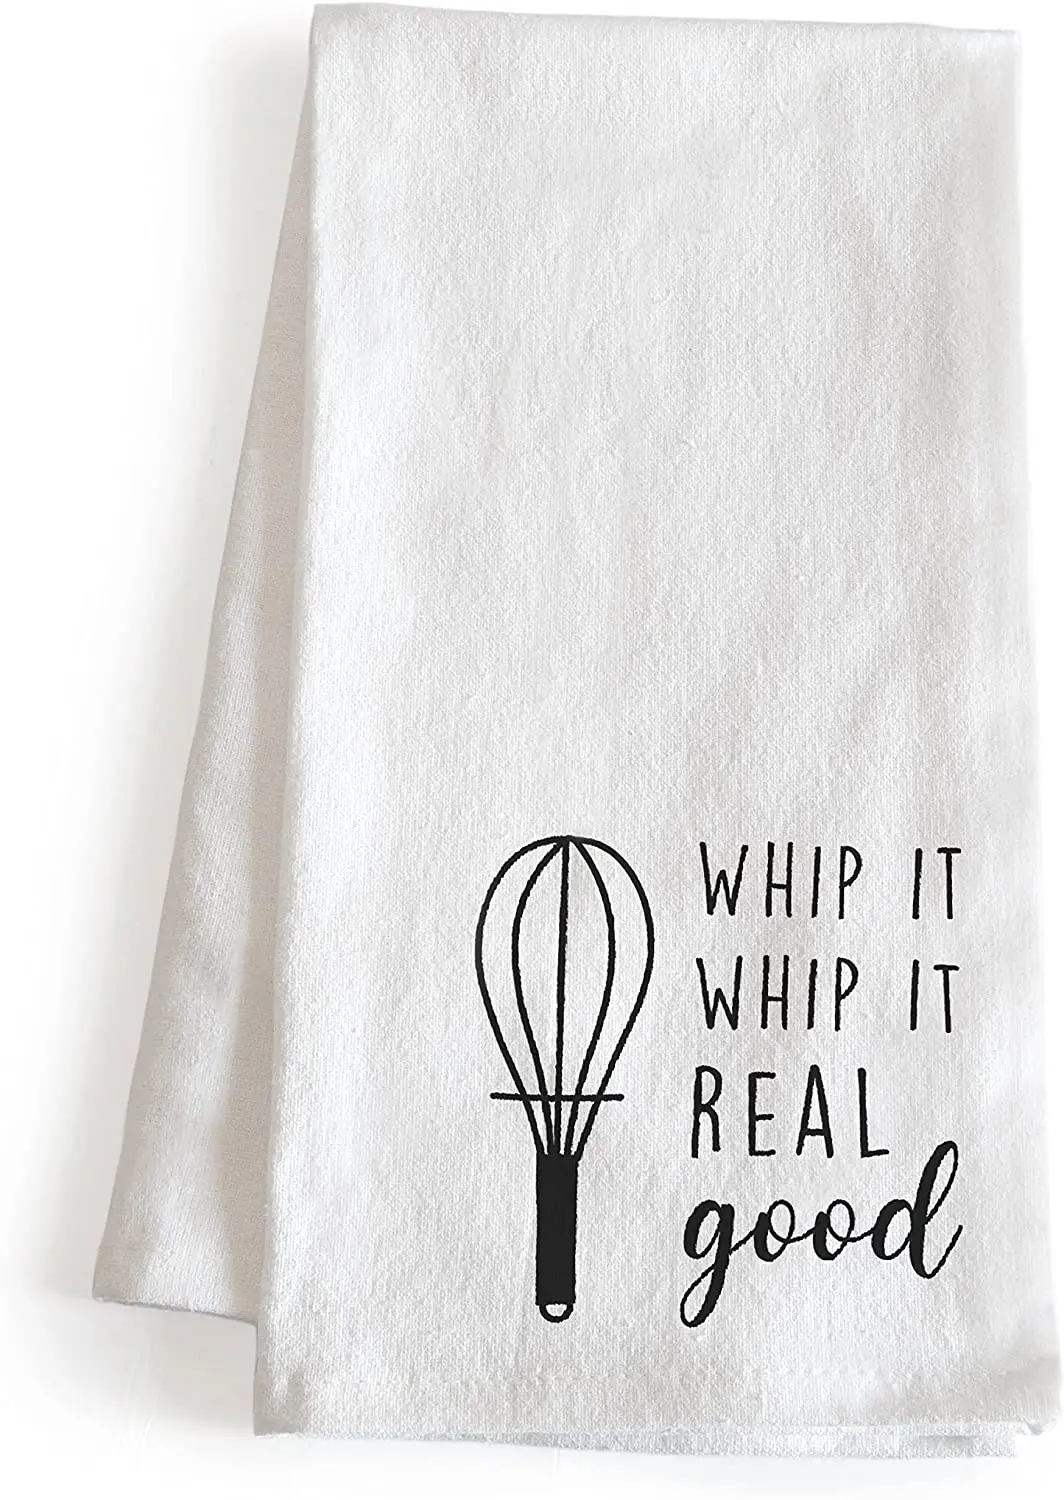 https://ae01.alicdn.com/kf/S4c17034fc3024289a4d4785ee3585167q/Whip-It-Good-Dish-Towel-18x24-Inch-Whip-Kitchen-Towel-Funny-Kitchen-Towel-Saying-Whip-Good.jpg